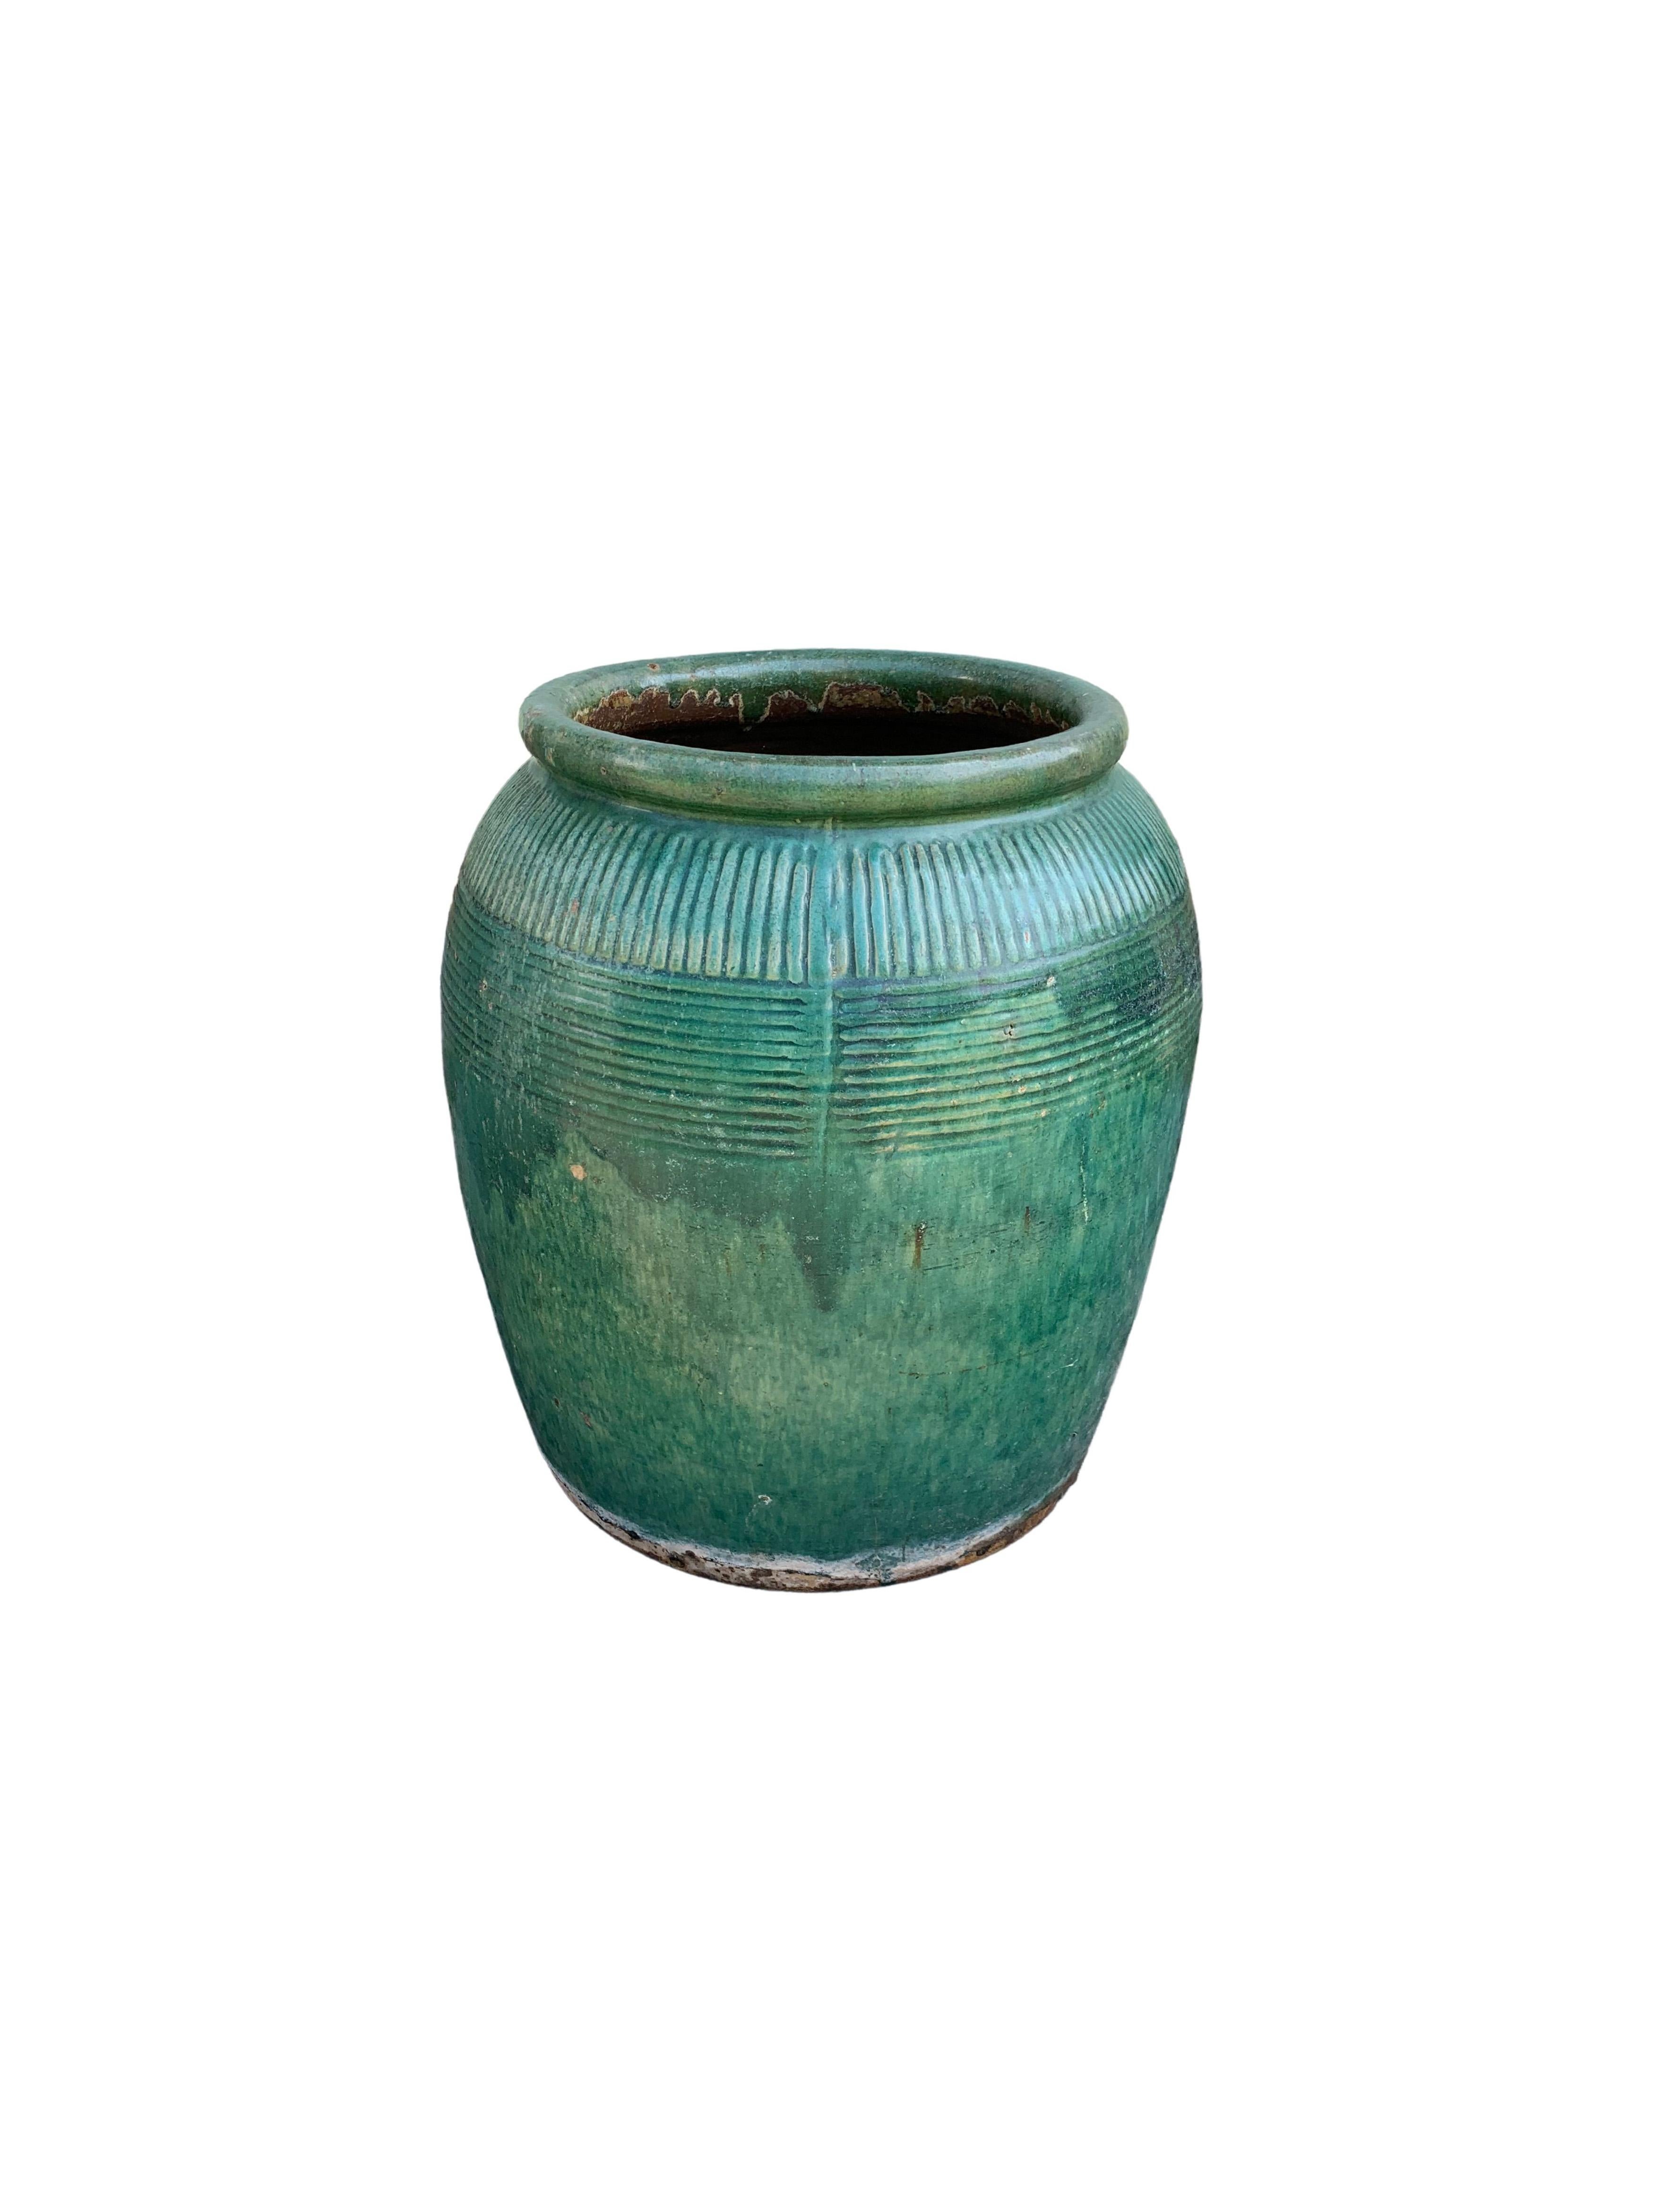 Antique Chinese Green Glazed Ceramic Soy Sauce Jar, c. 1900 For Sale 2